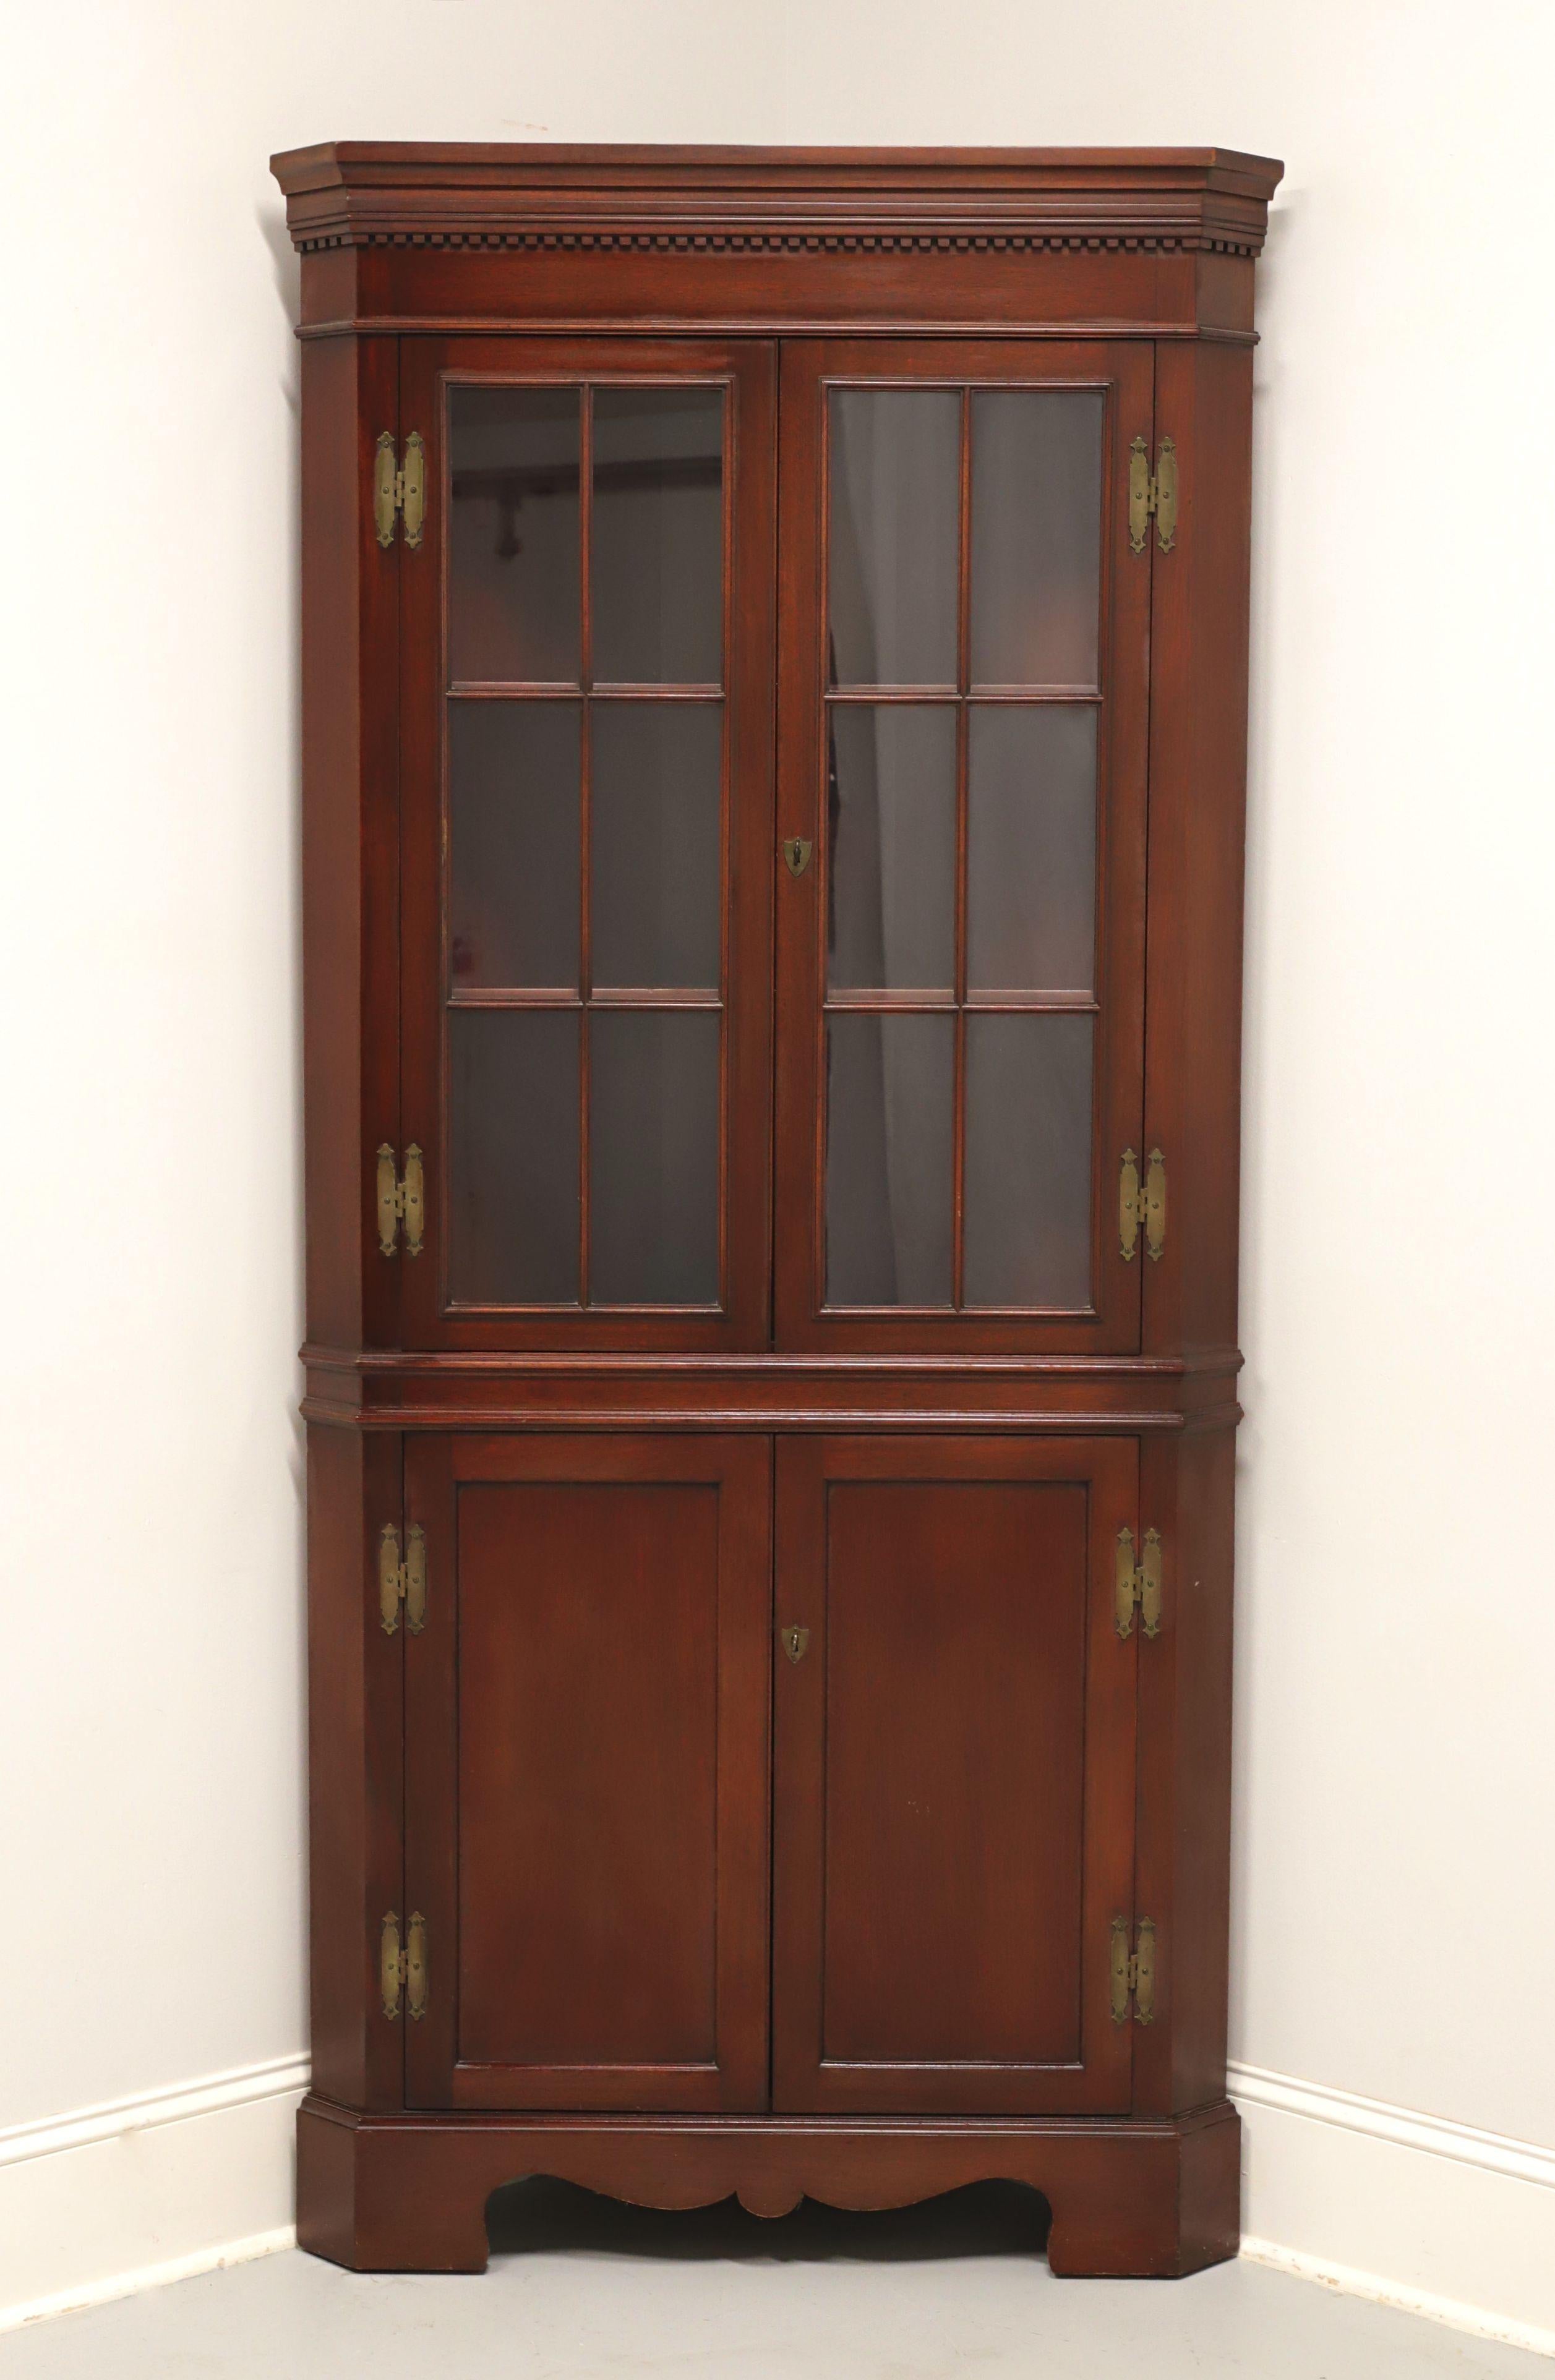 A Chippendale style corner cupboard by high-quality furniture maker Craftique. Solid mahogany, likely with their Colonial finish, crown & dentil molding to top, carved apron, and bracket feet. Upper cabinet features two fixed plate-grooved wooden